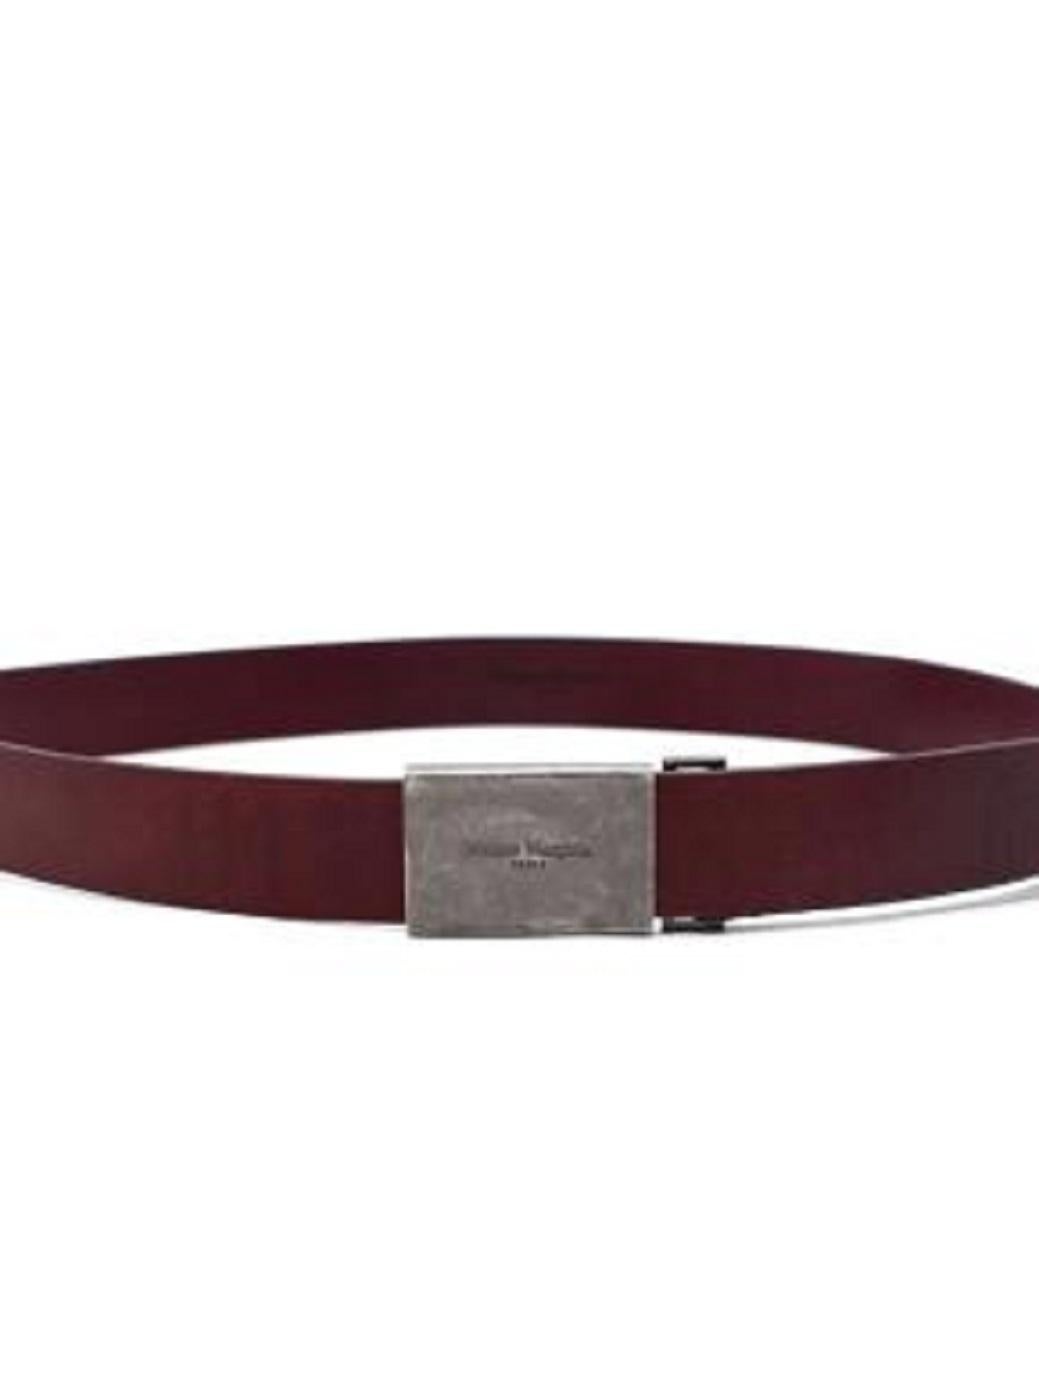 Maison Margiela Dark Plum Leather Belt with Burnished Buckle

- Burgundy smooth leather belt 
- Plate buckle in burnished silver-tone metal
- Adjustable

Materials:
Leather

Made in Italy

PLEASE NOTE, THESE ITEMS ARE PRE-OWNED AND MAY SHOW SIGNS OF